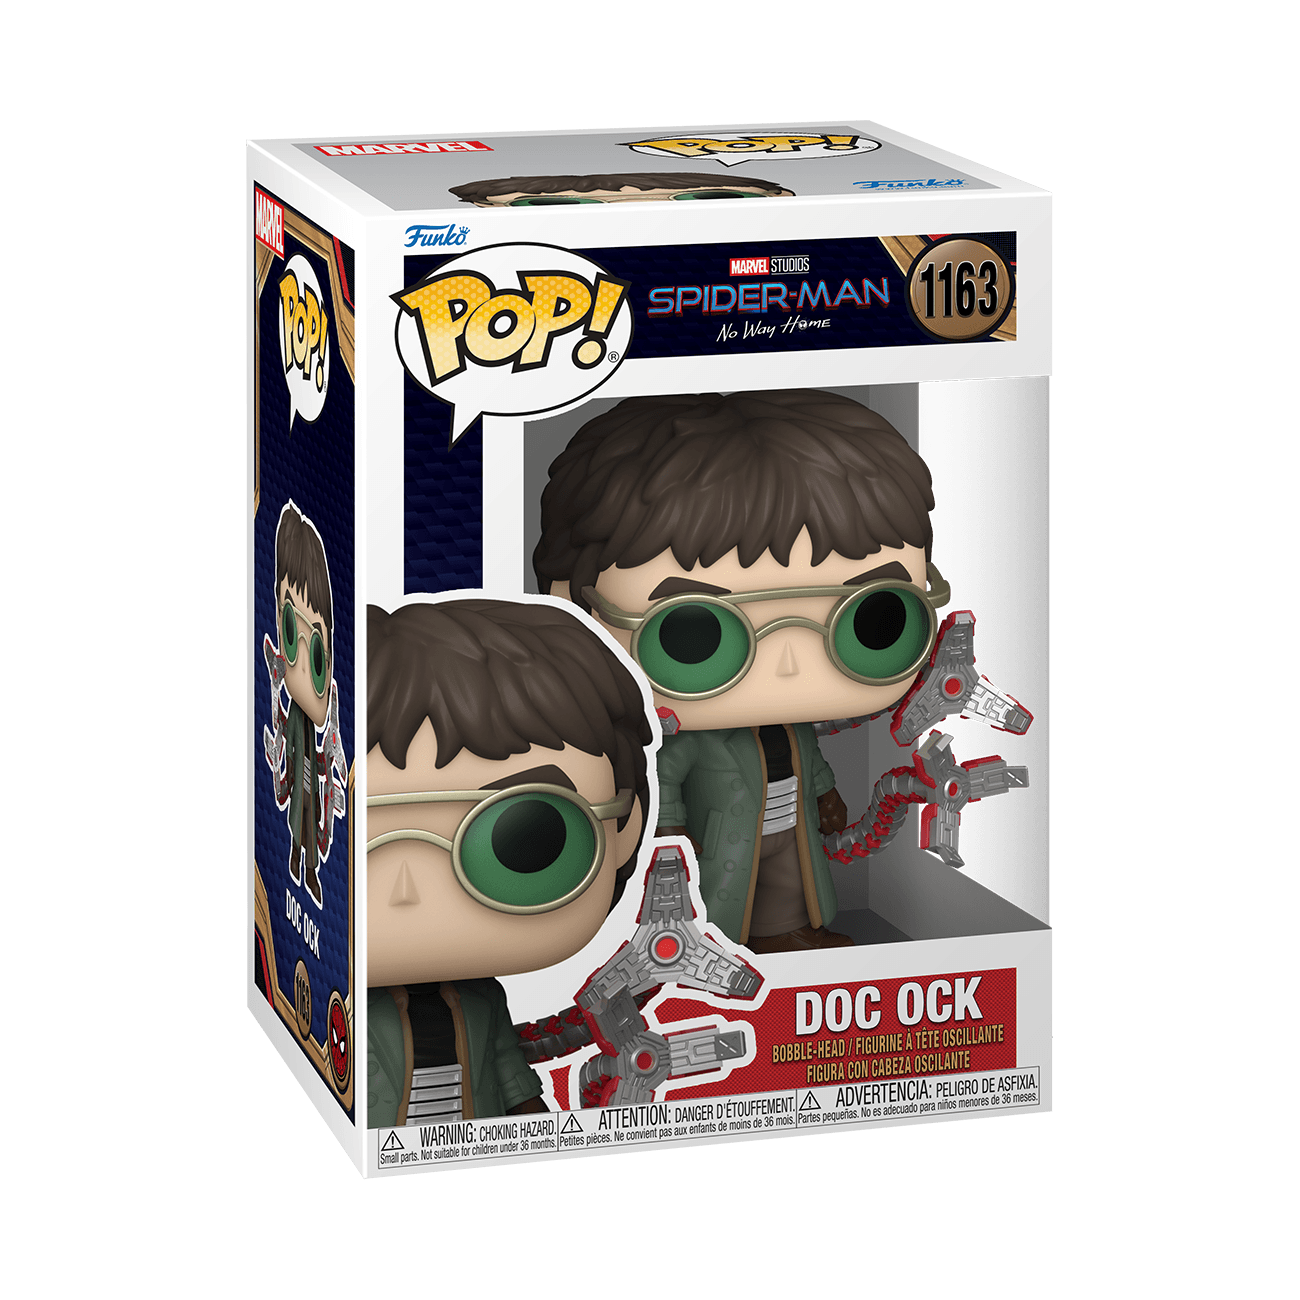 Funko Doc Ock - Spider-Man No Way Home - BumbleToys - 18+, Action Figures, Avengers, Boys, Characters, Funko, Pre-Order, Spider man, Spiderman